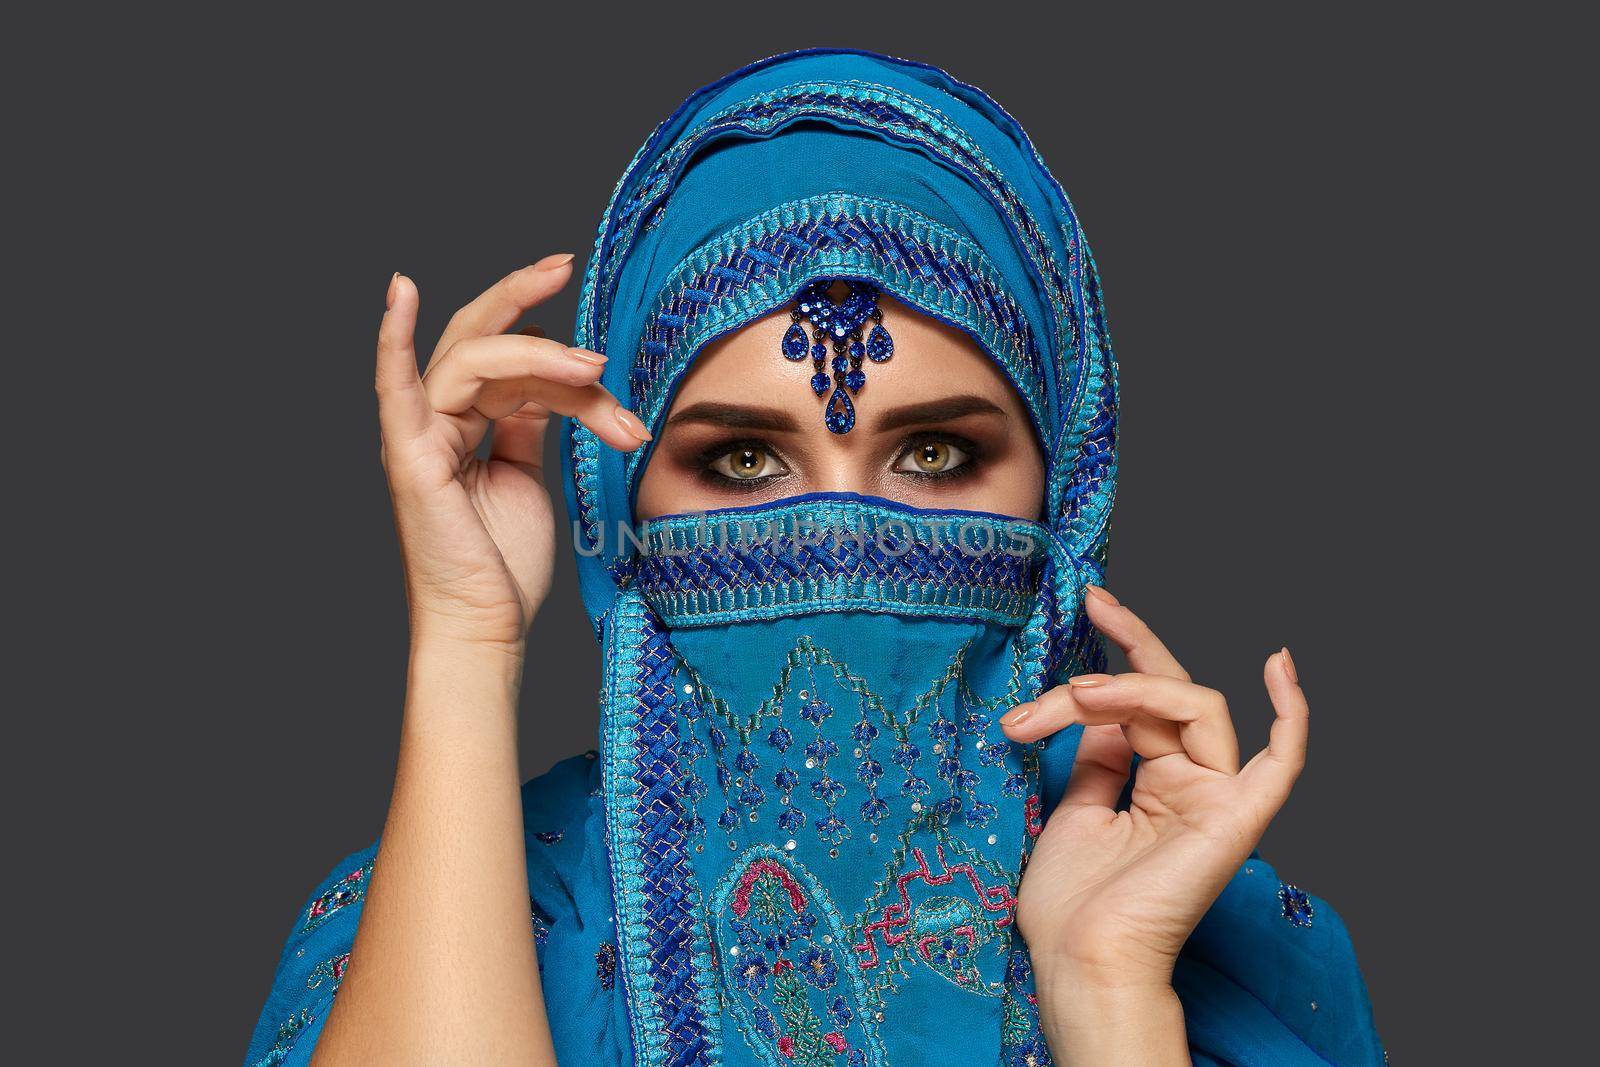 Close-up portrait of a lovely young woman with beautiful smoky eyes wearing a blue hijab decorated with sequins and jewelry. She is gesticulating and looking at the camera on a dark background. Human emotions, facial expression concept. Trendy colors. Arabic style.